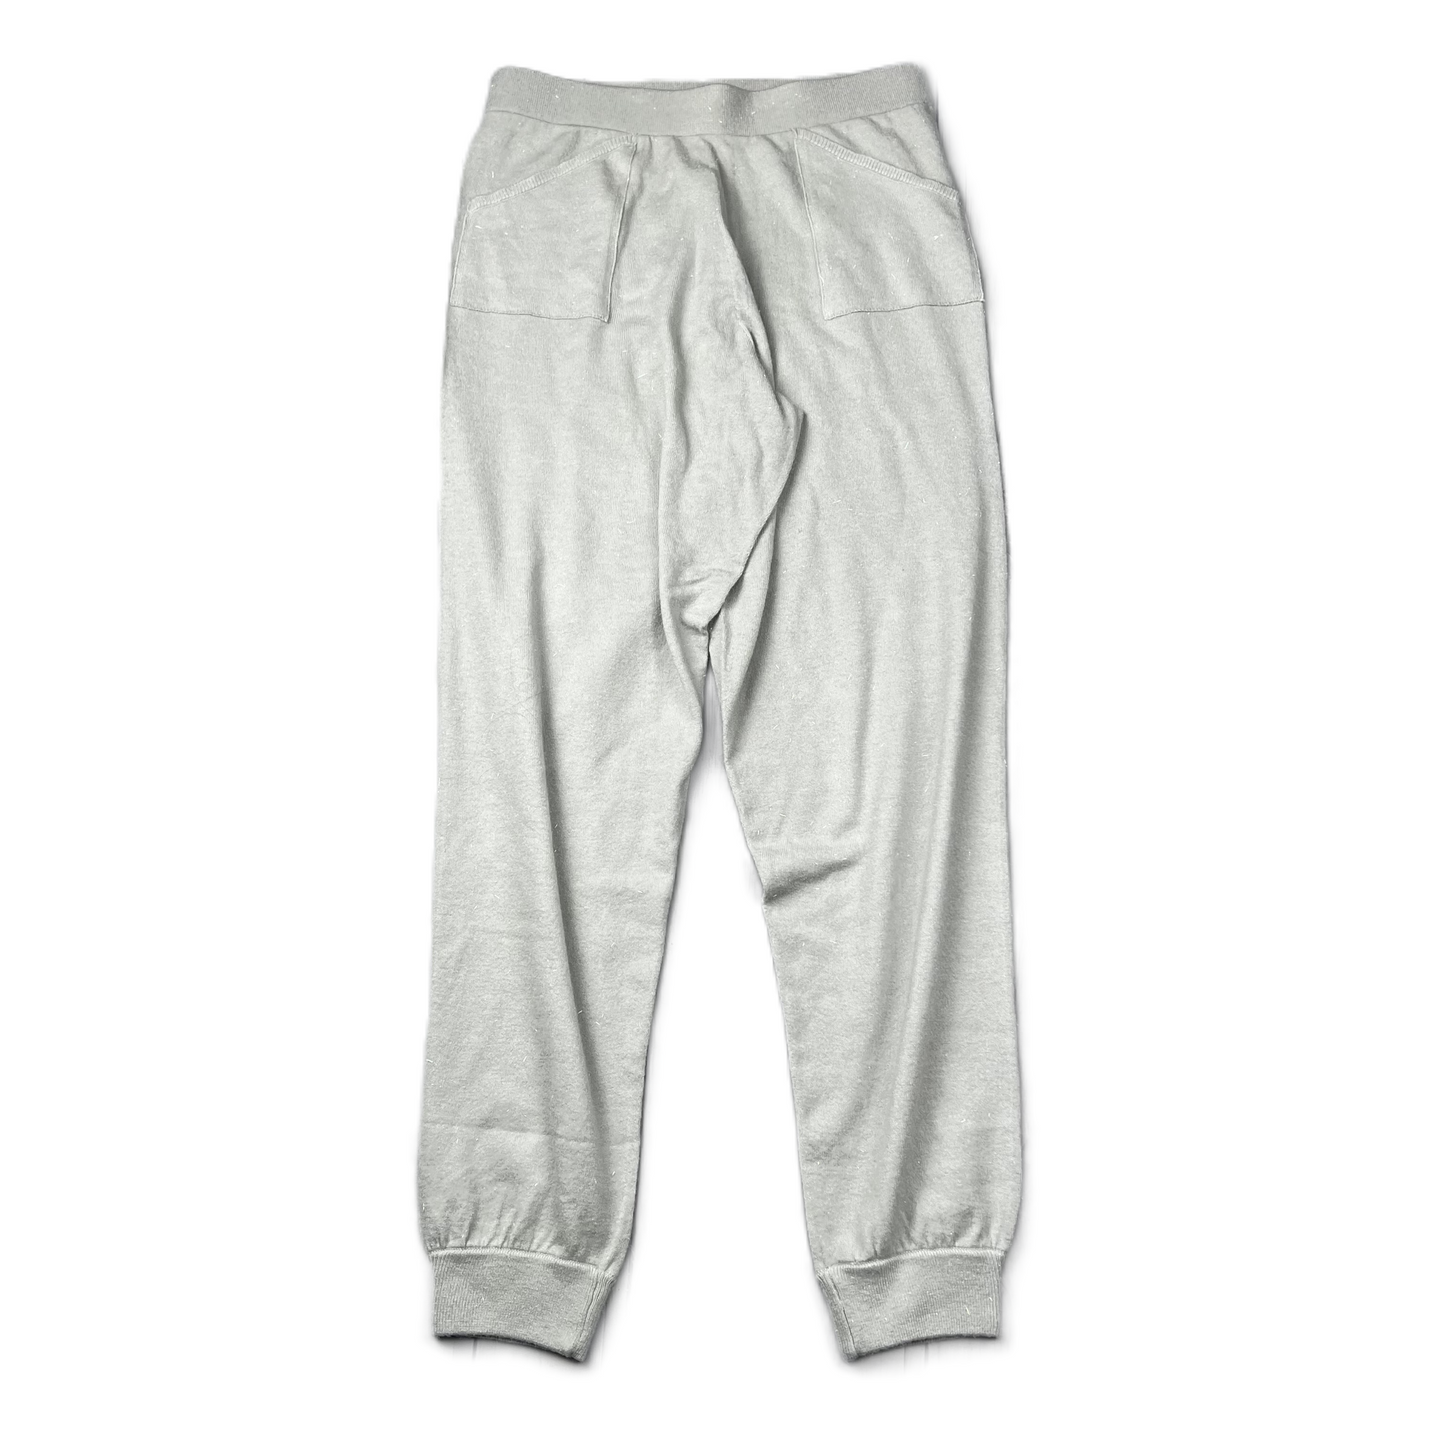 Grey Pants Joggers By 525, Size: 8